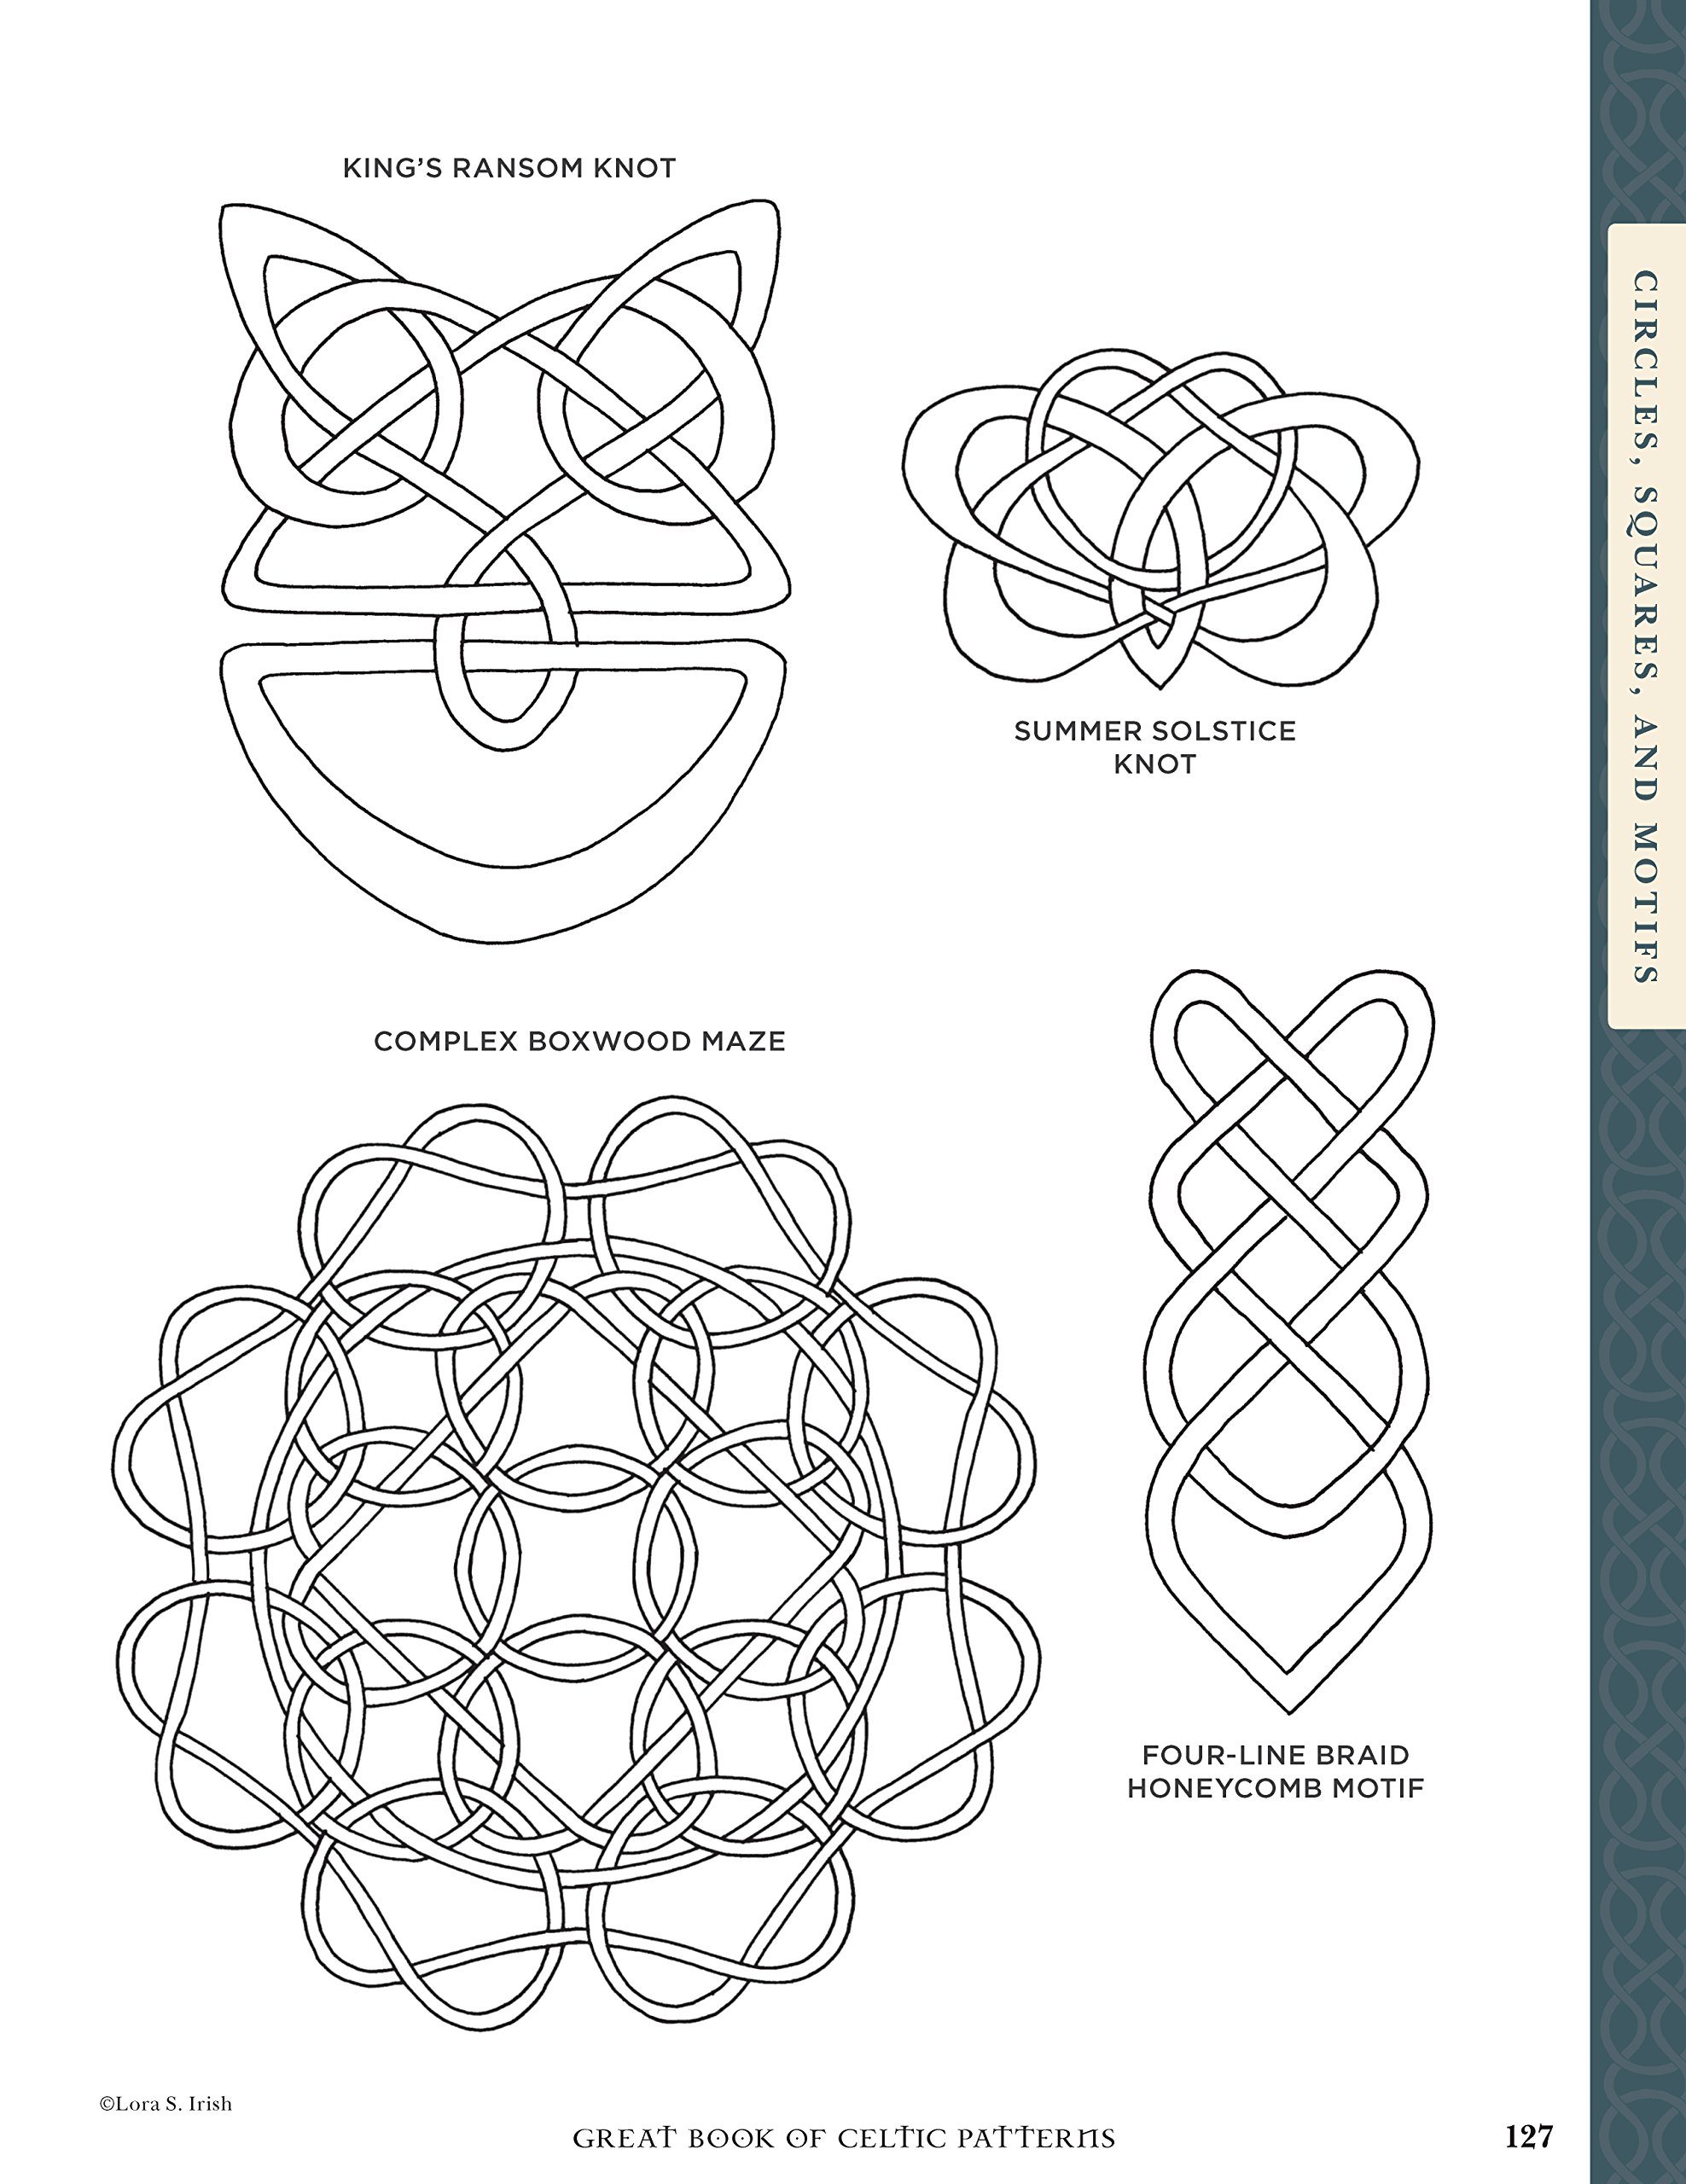 Great Book of Celtic Patterns, Second Edition, Revised and Expanded: The Ultimate Design Sourcebook for Artists and Crafters (Fox Chapel Publishing) 200 Original Patterns with Celtic Braids & Knots